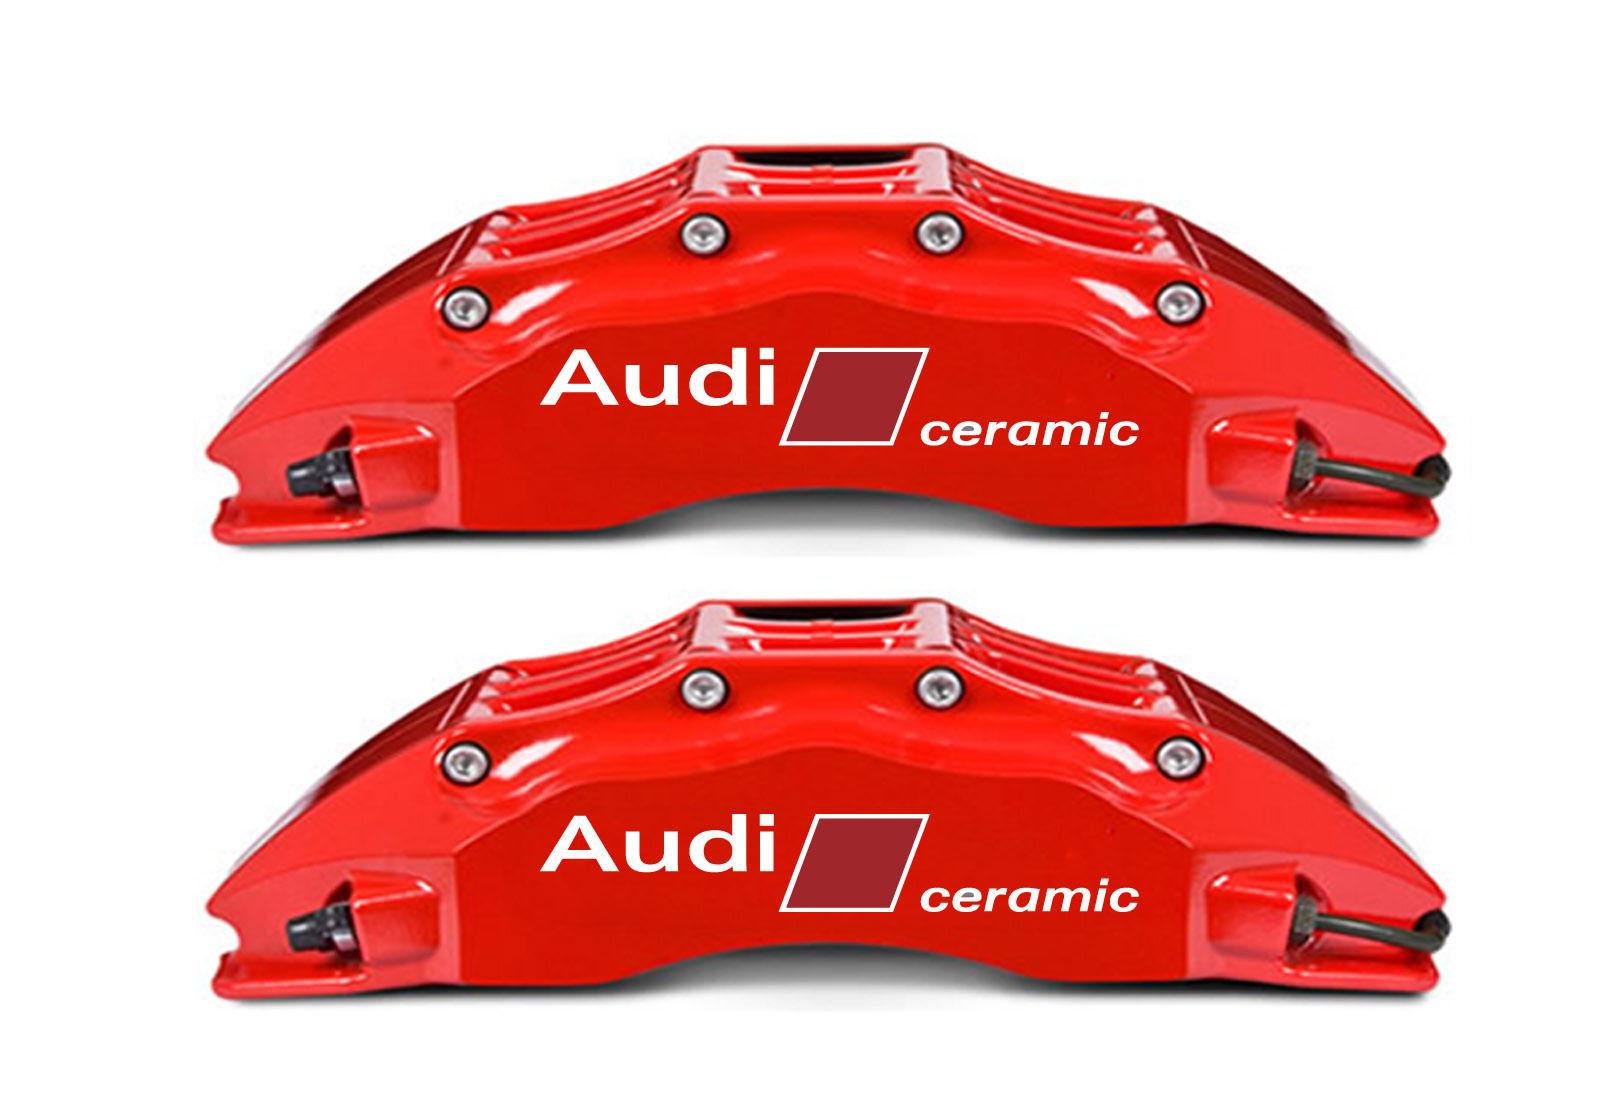 2 Audi Carbon Ceramic Stickers Brakes RS4 RS6 RS7 S8 Q7 Decals